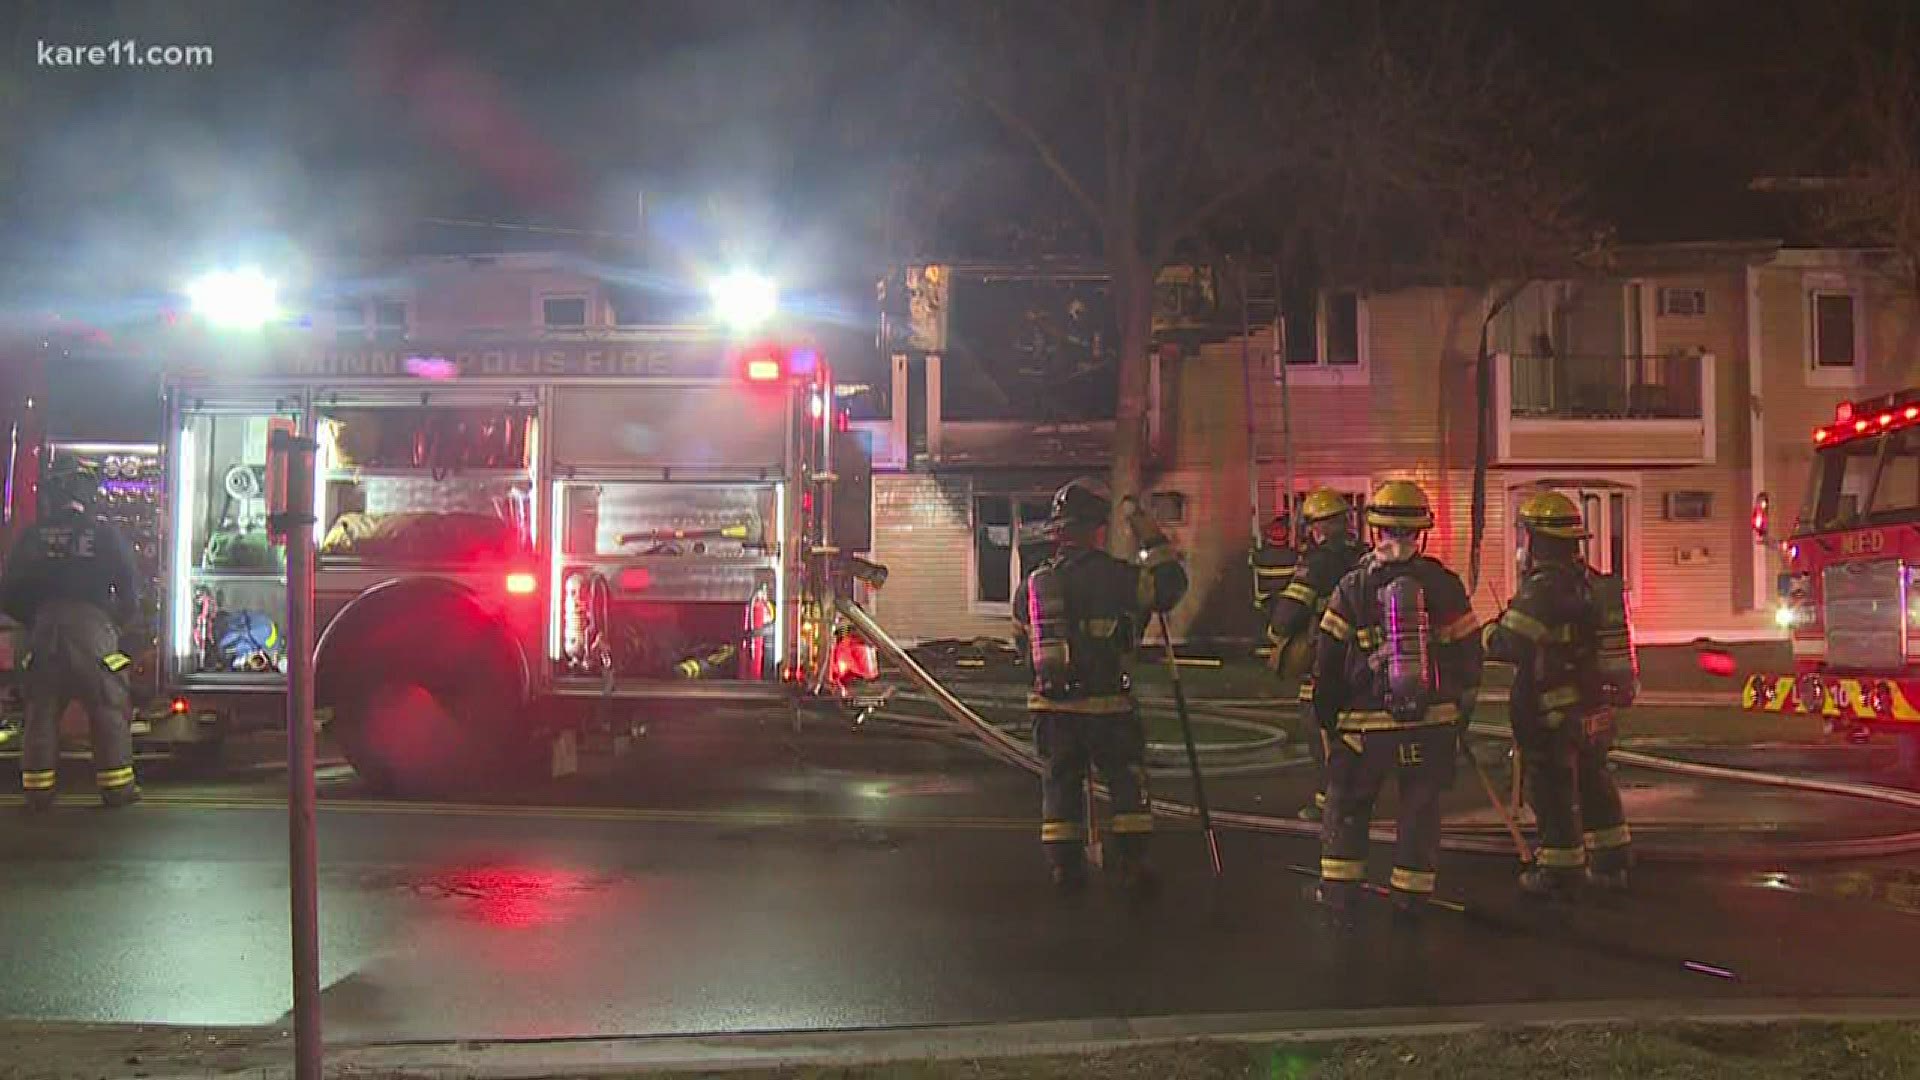 The 2-alarm fire started just after 1 a.m. on Penn Ave. North.